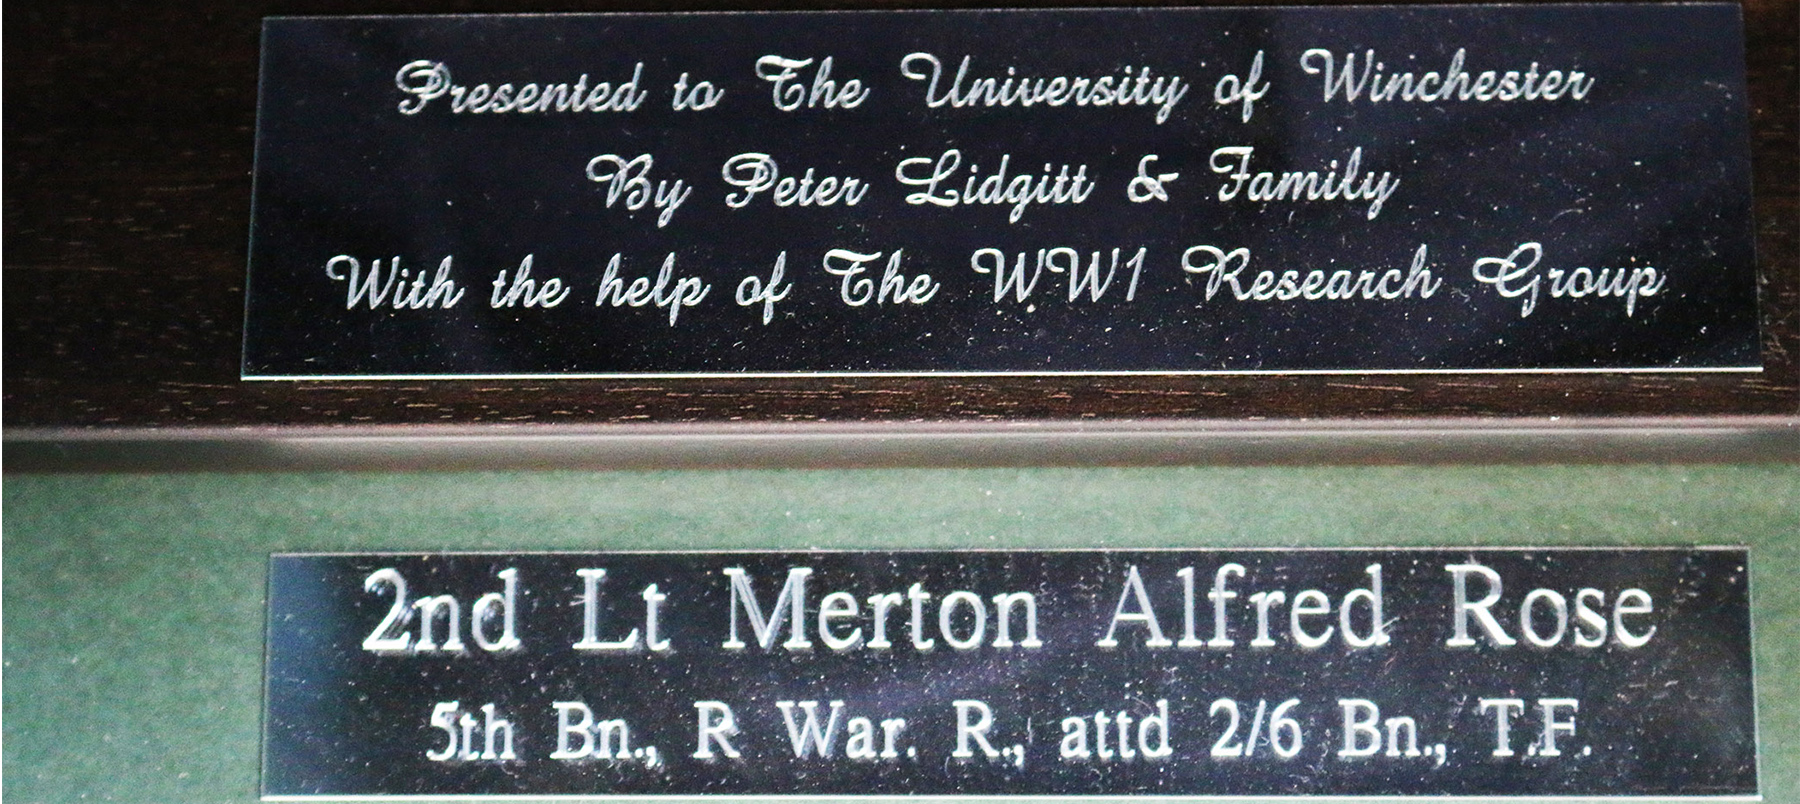 Plaques indicating the donor of military medals